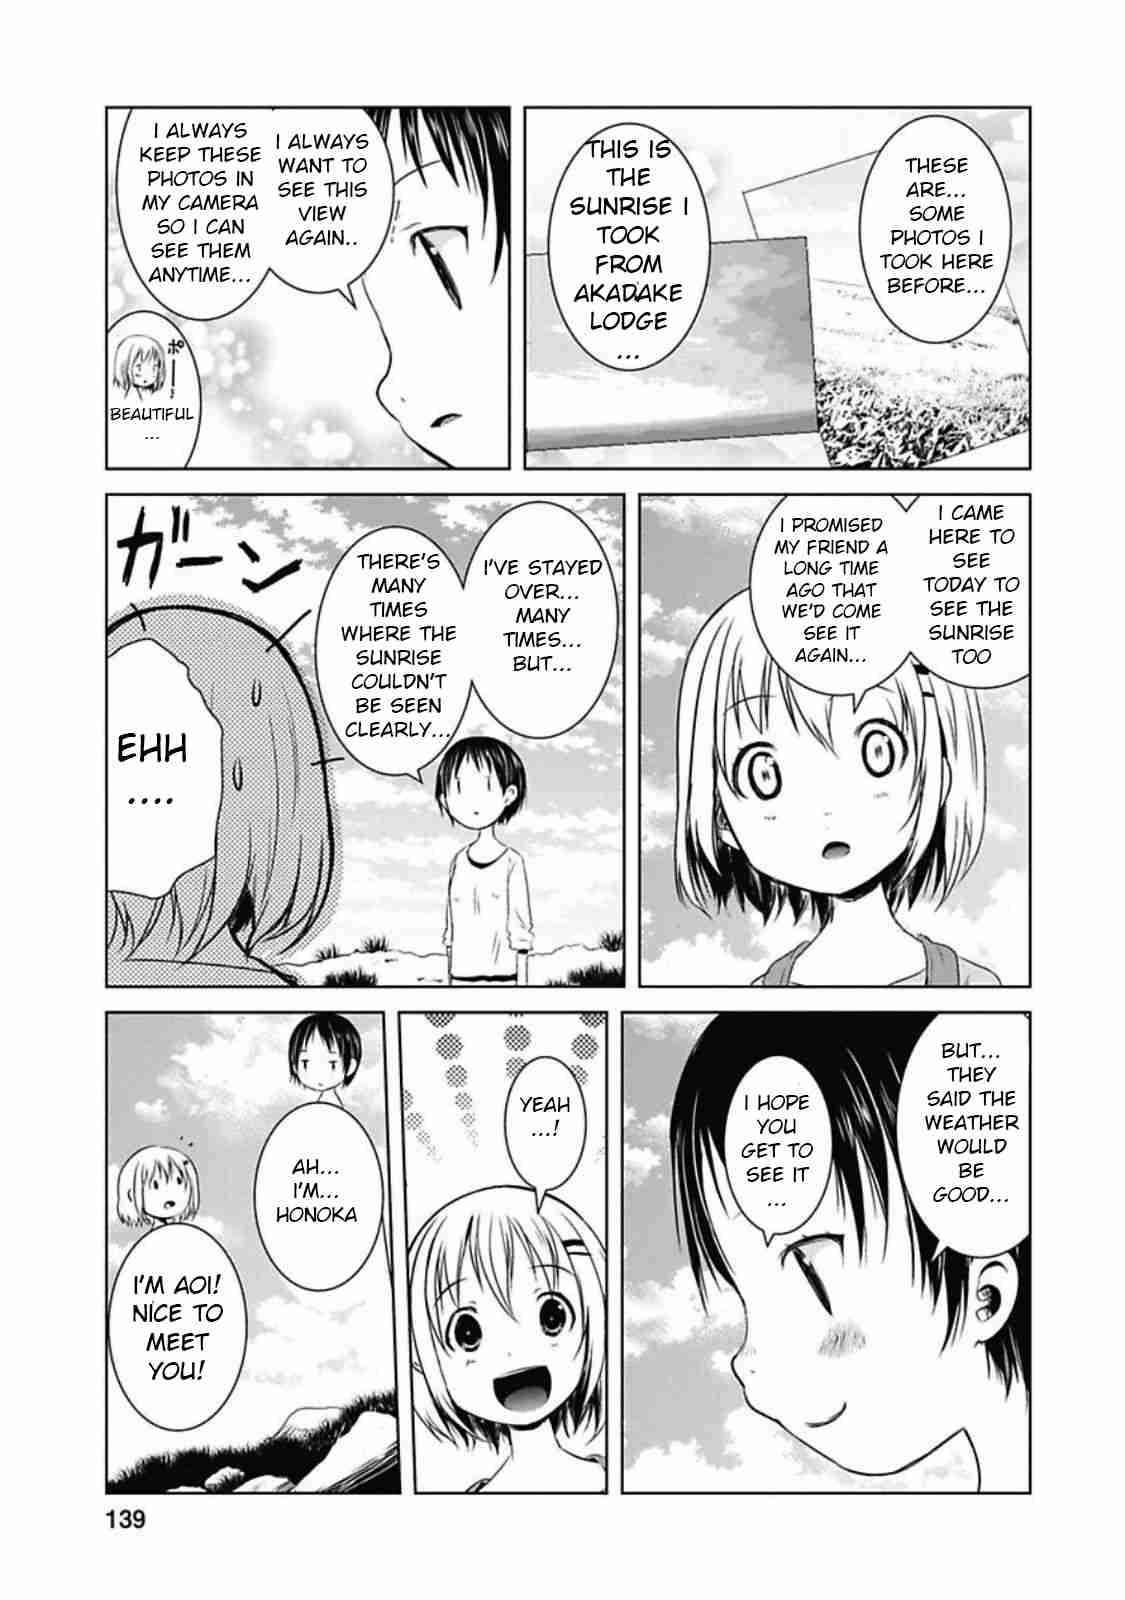 Yama No Susume Vol. 4 Ch. 31 Premonition of an Encounter